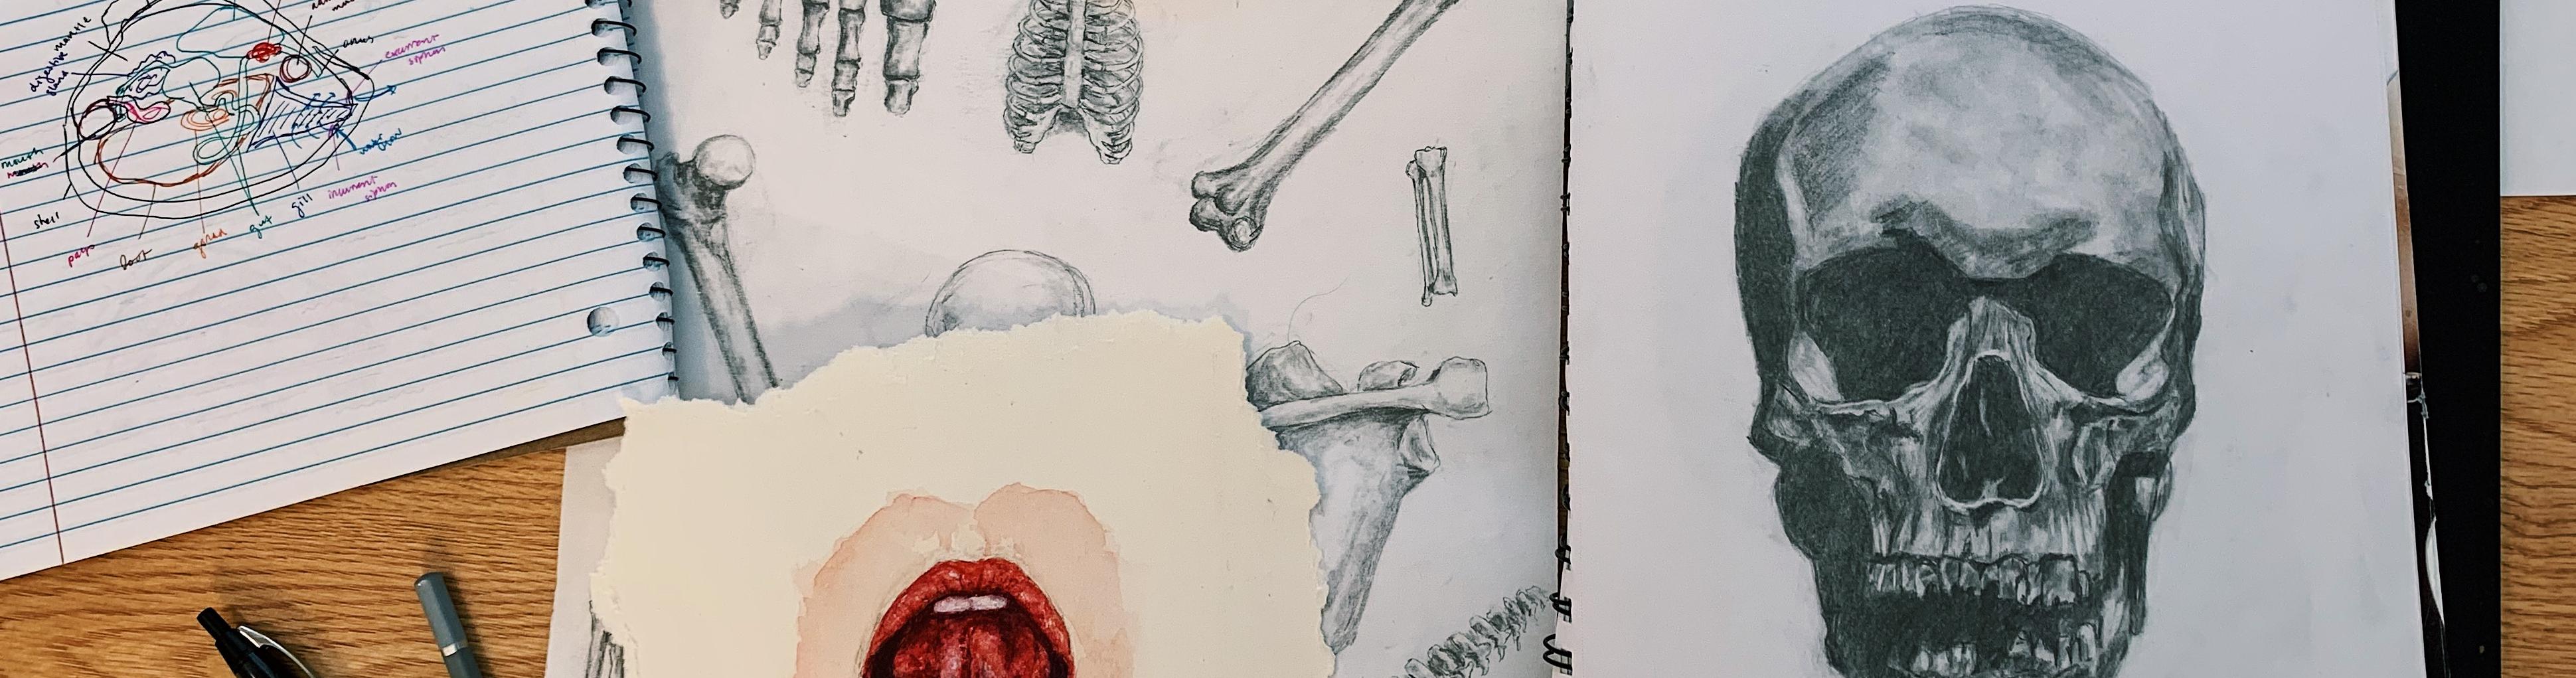 A sketchbook containing a labeled drawing of a skull next to sketches of a skull and other bones